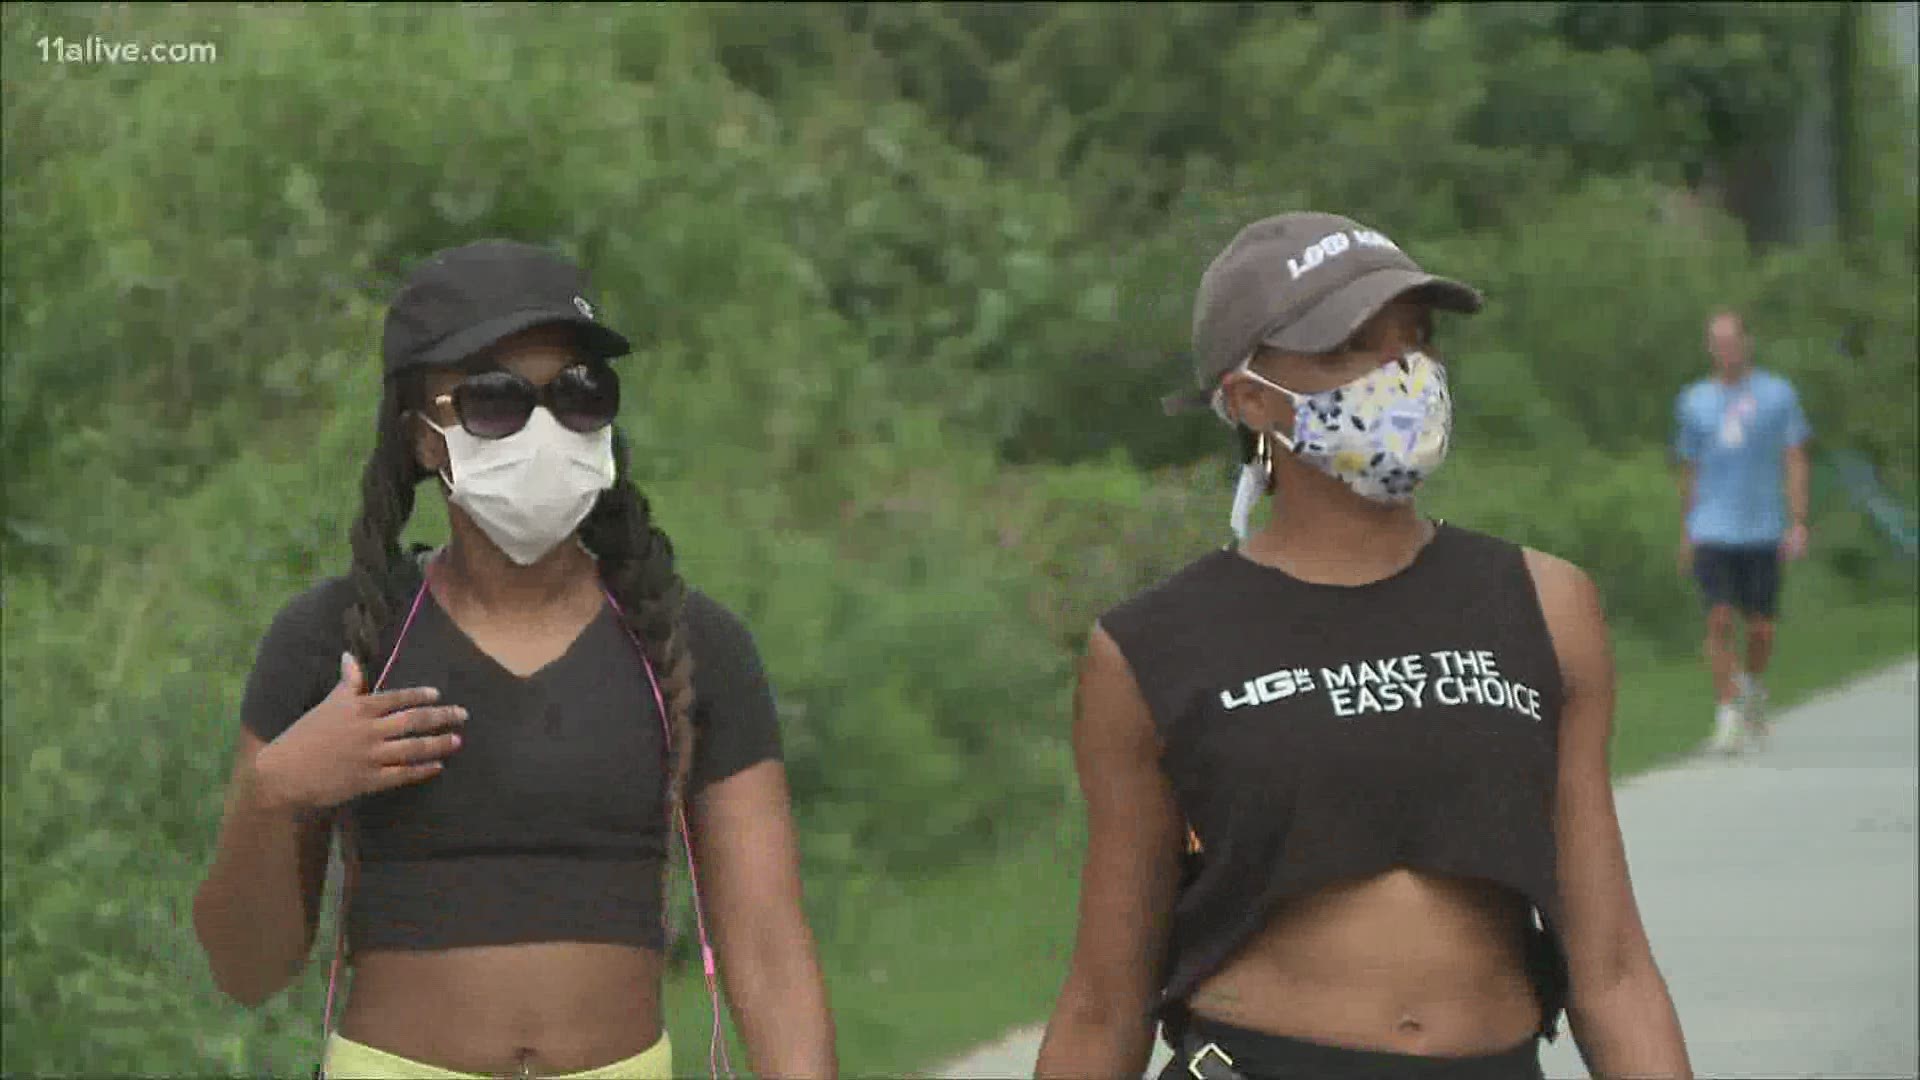 The city of Atlanta is now requiring you to wear a mask when out in public.